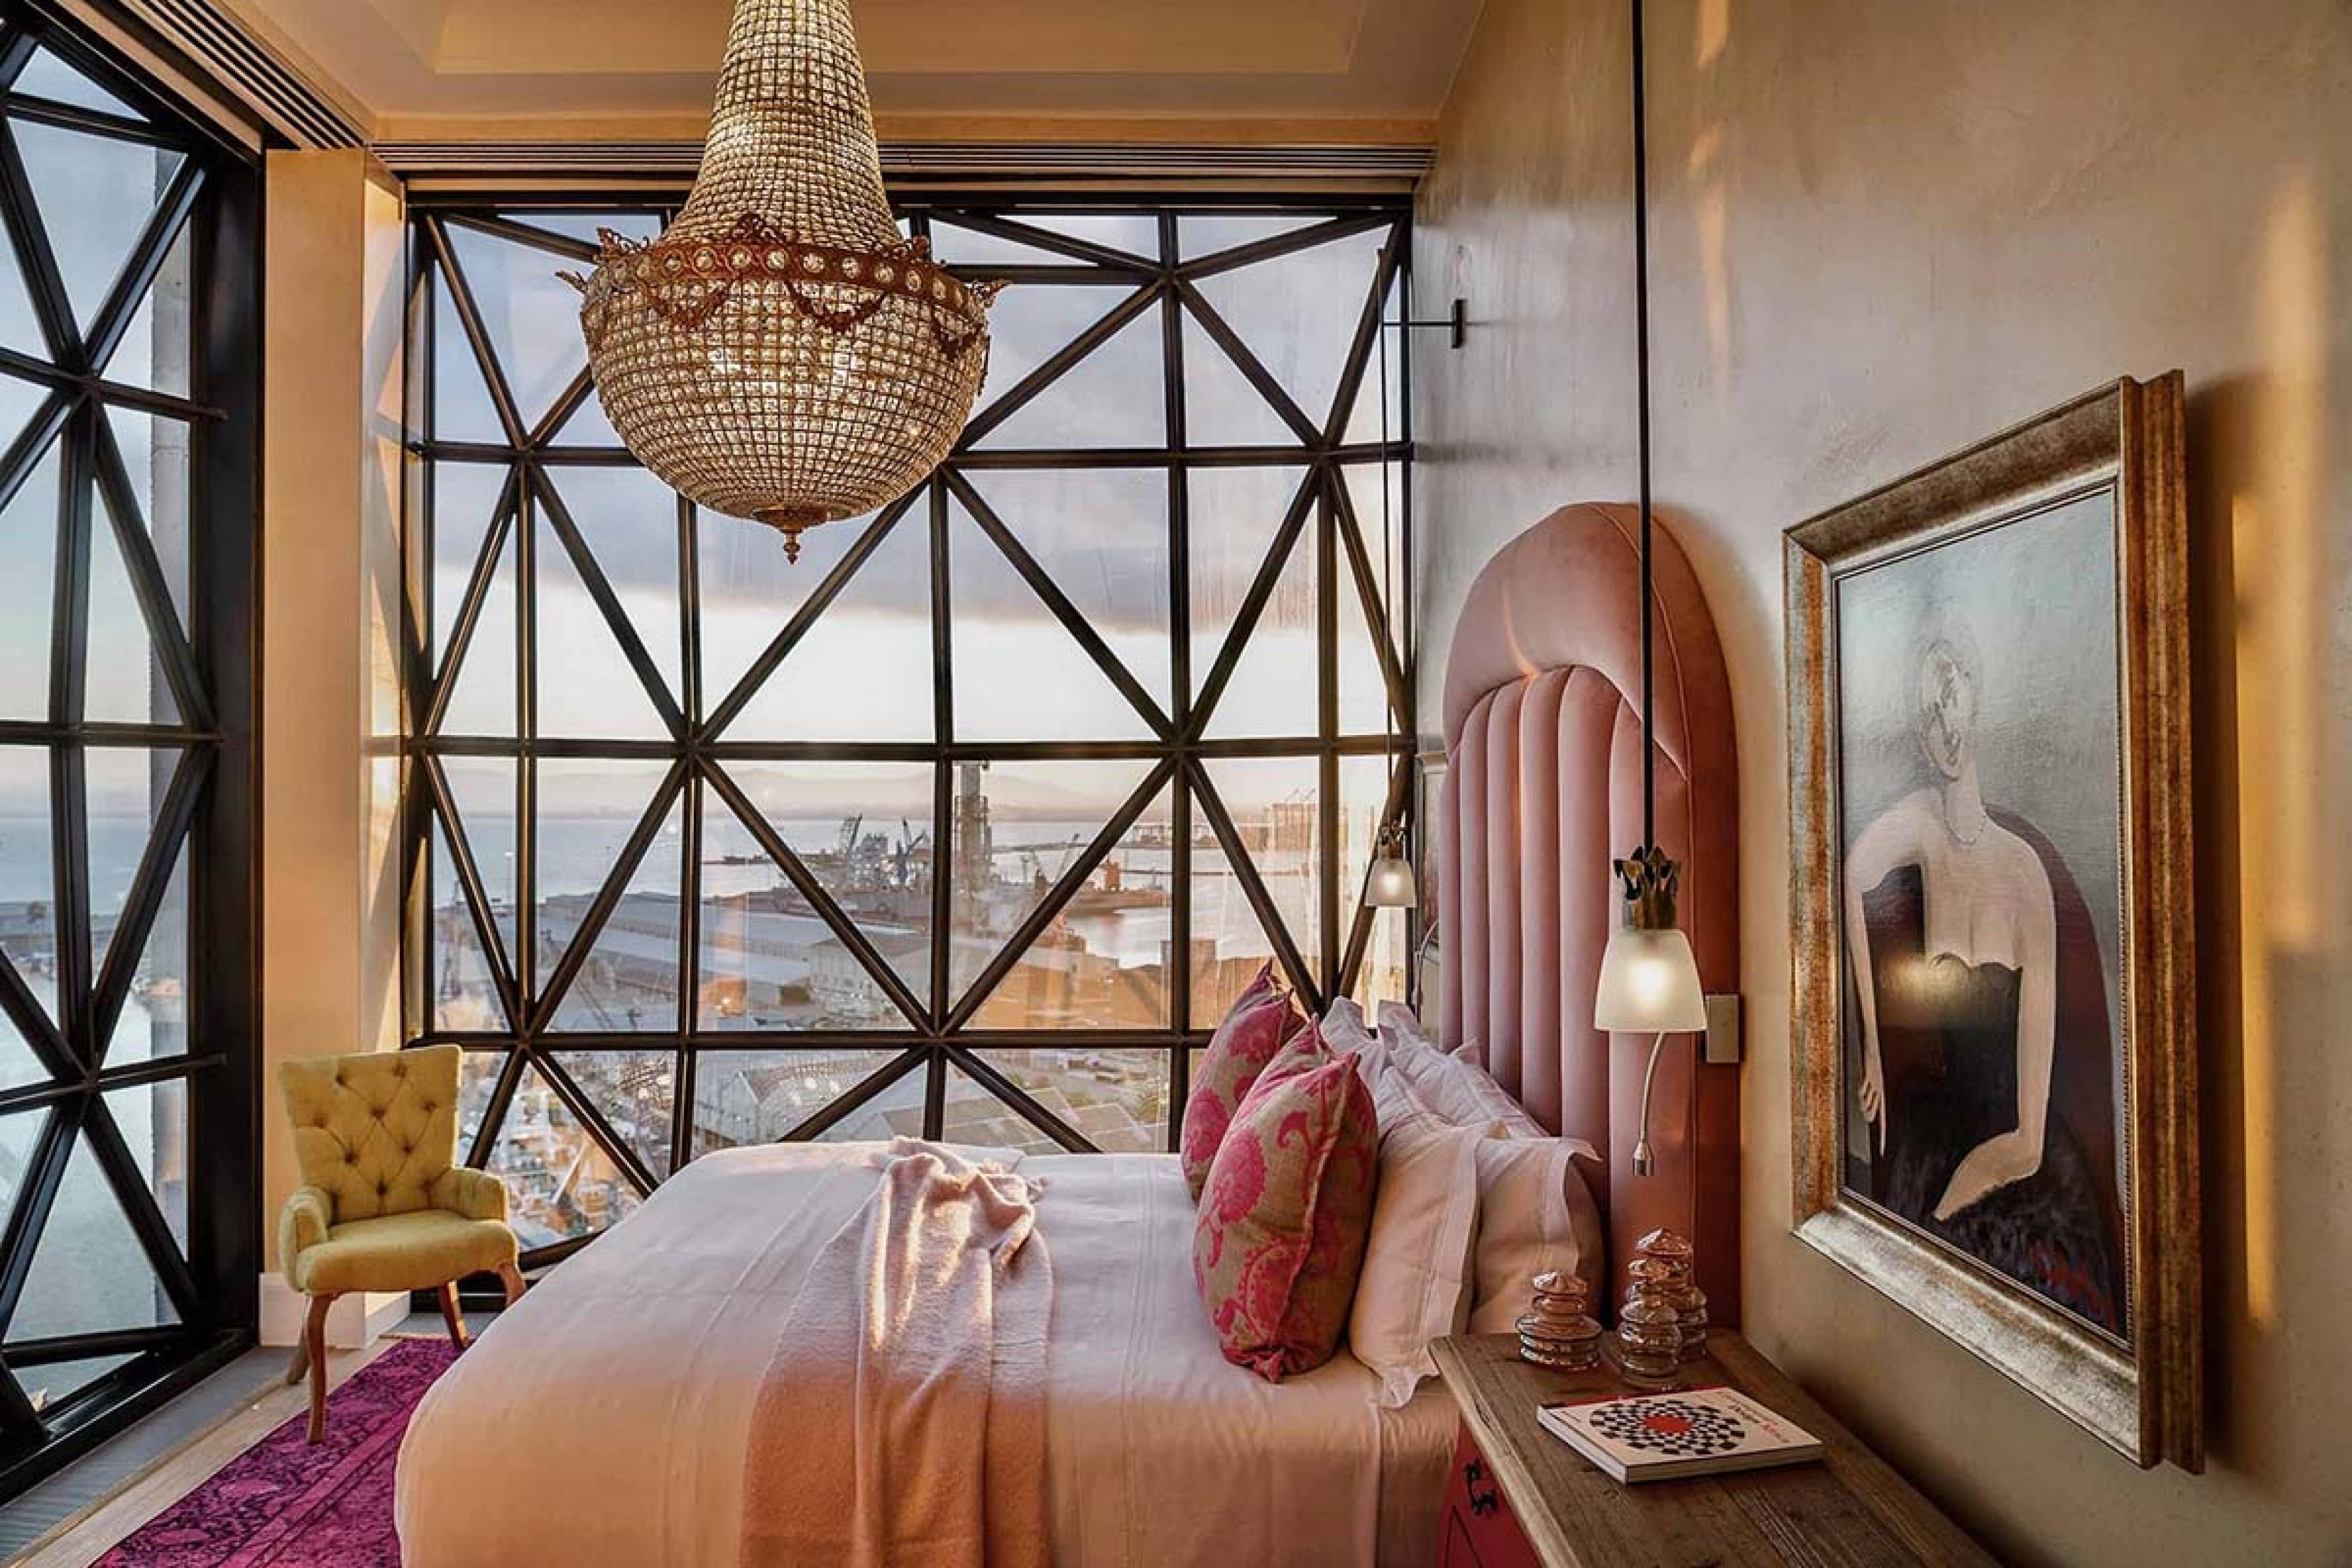 bed room with black framed geometric windows, a glass chandelier and a blush colored bed and headboard